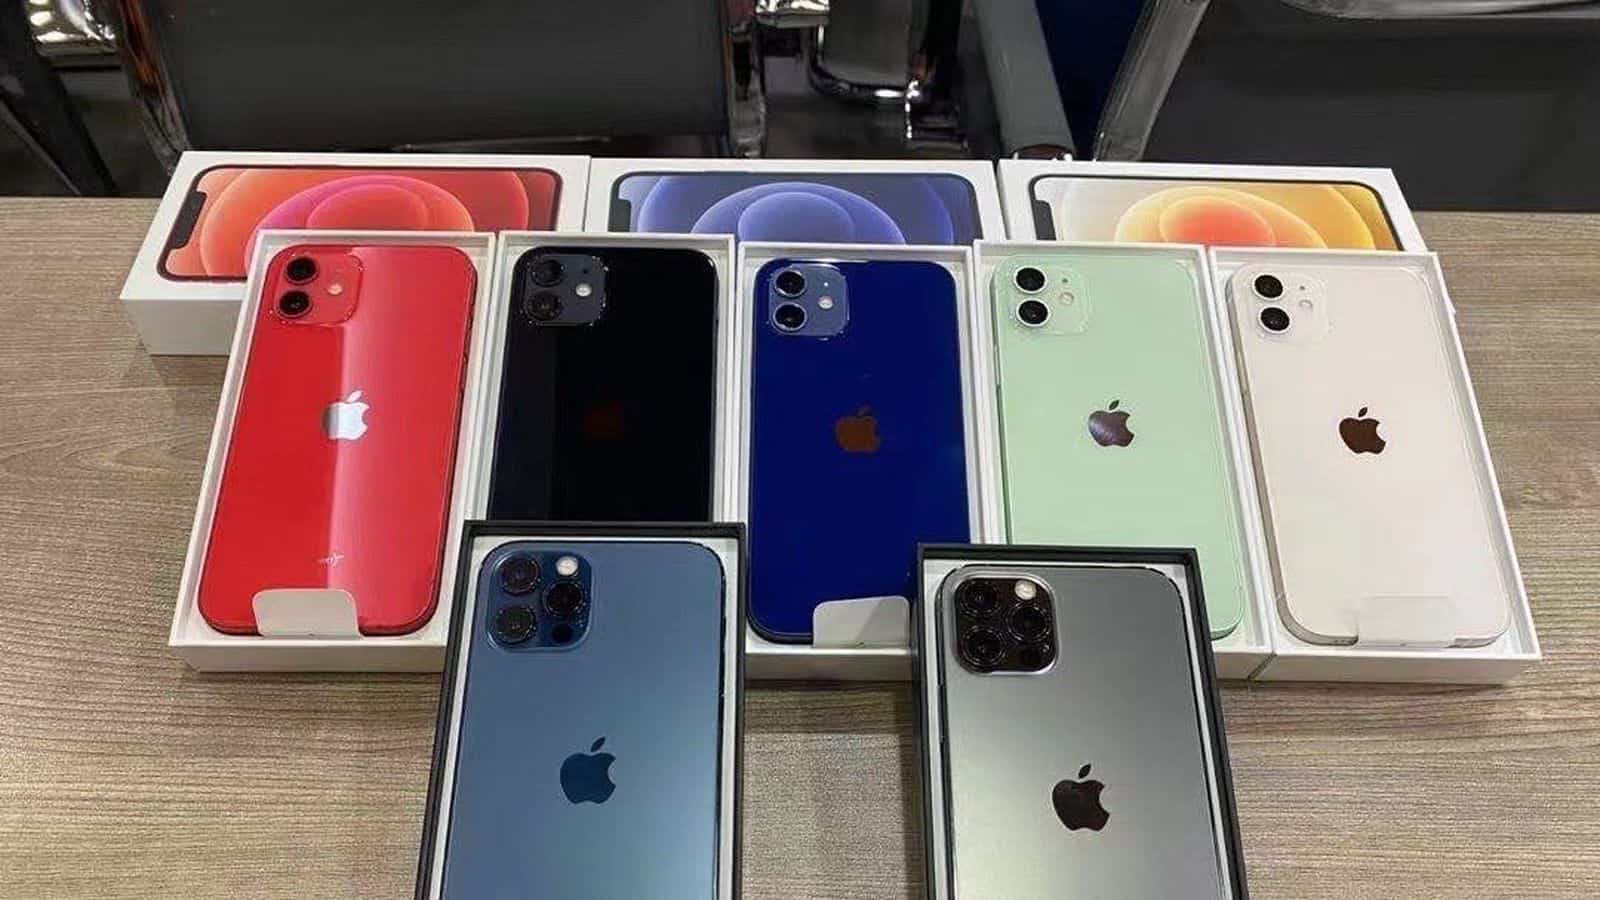 Which colour iPhone 12 or iPhone 12 Plus you should buy?